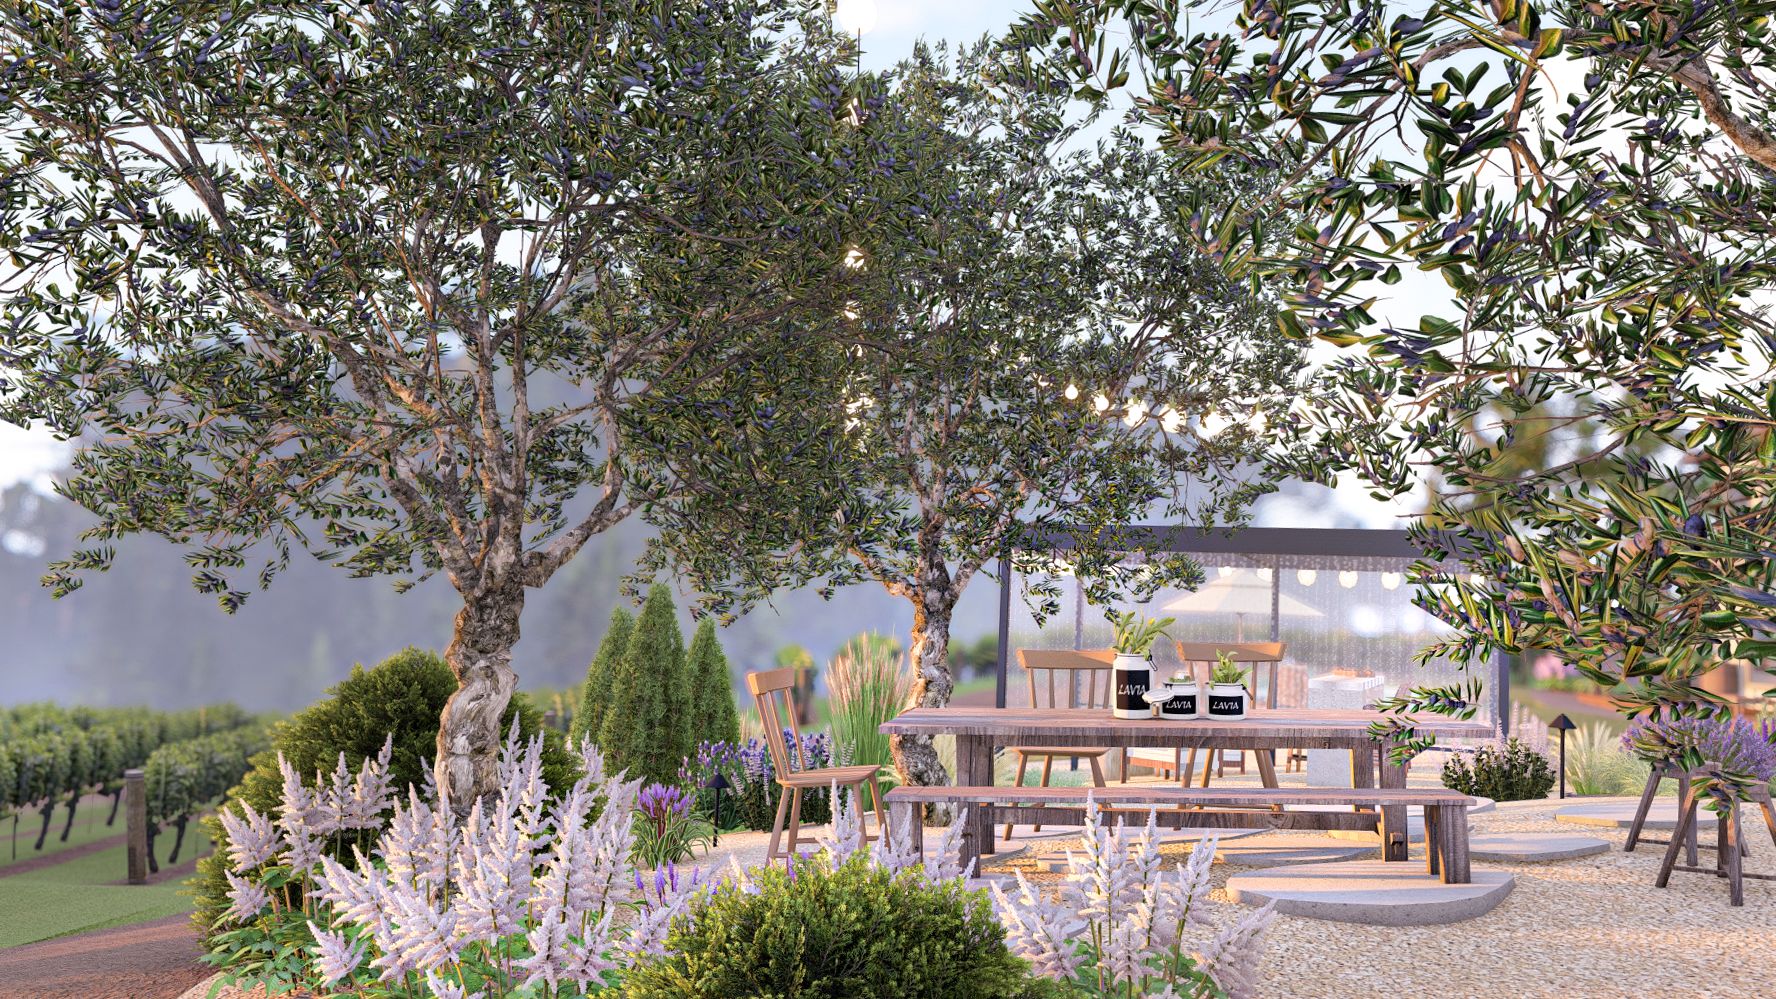 Close up view of an outdoor dining area surrounded by olive trees and lavender